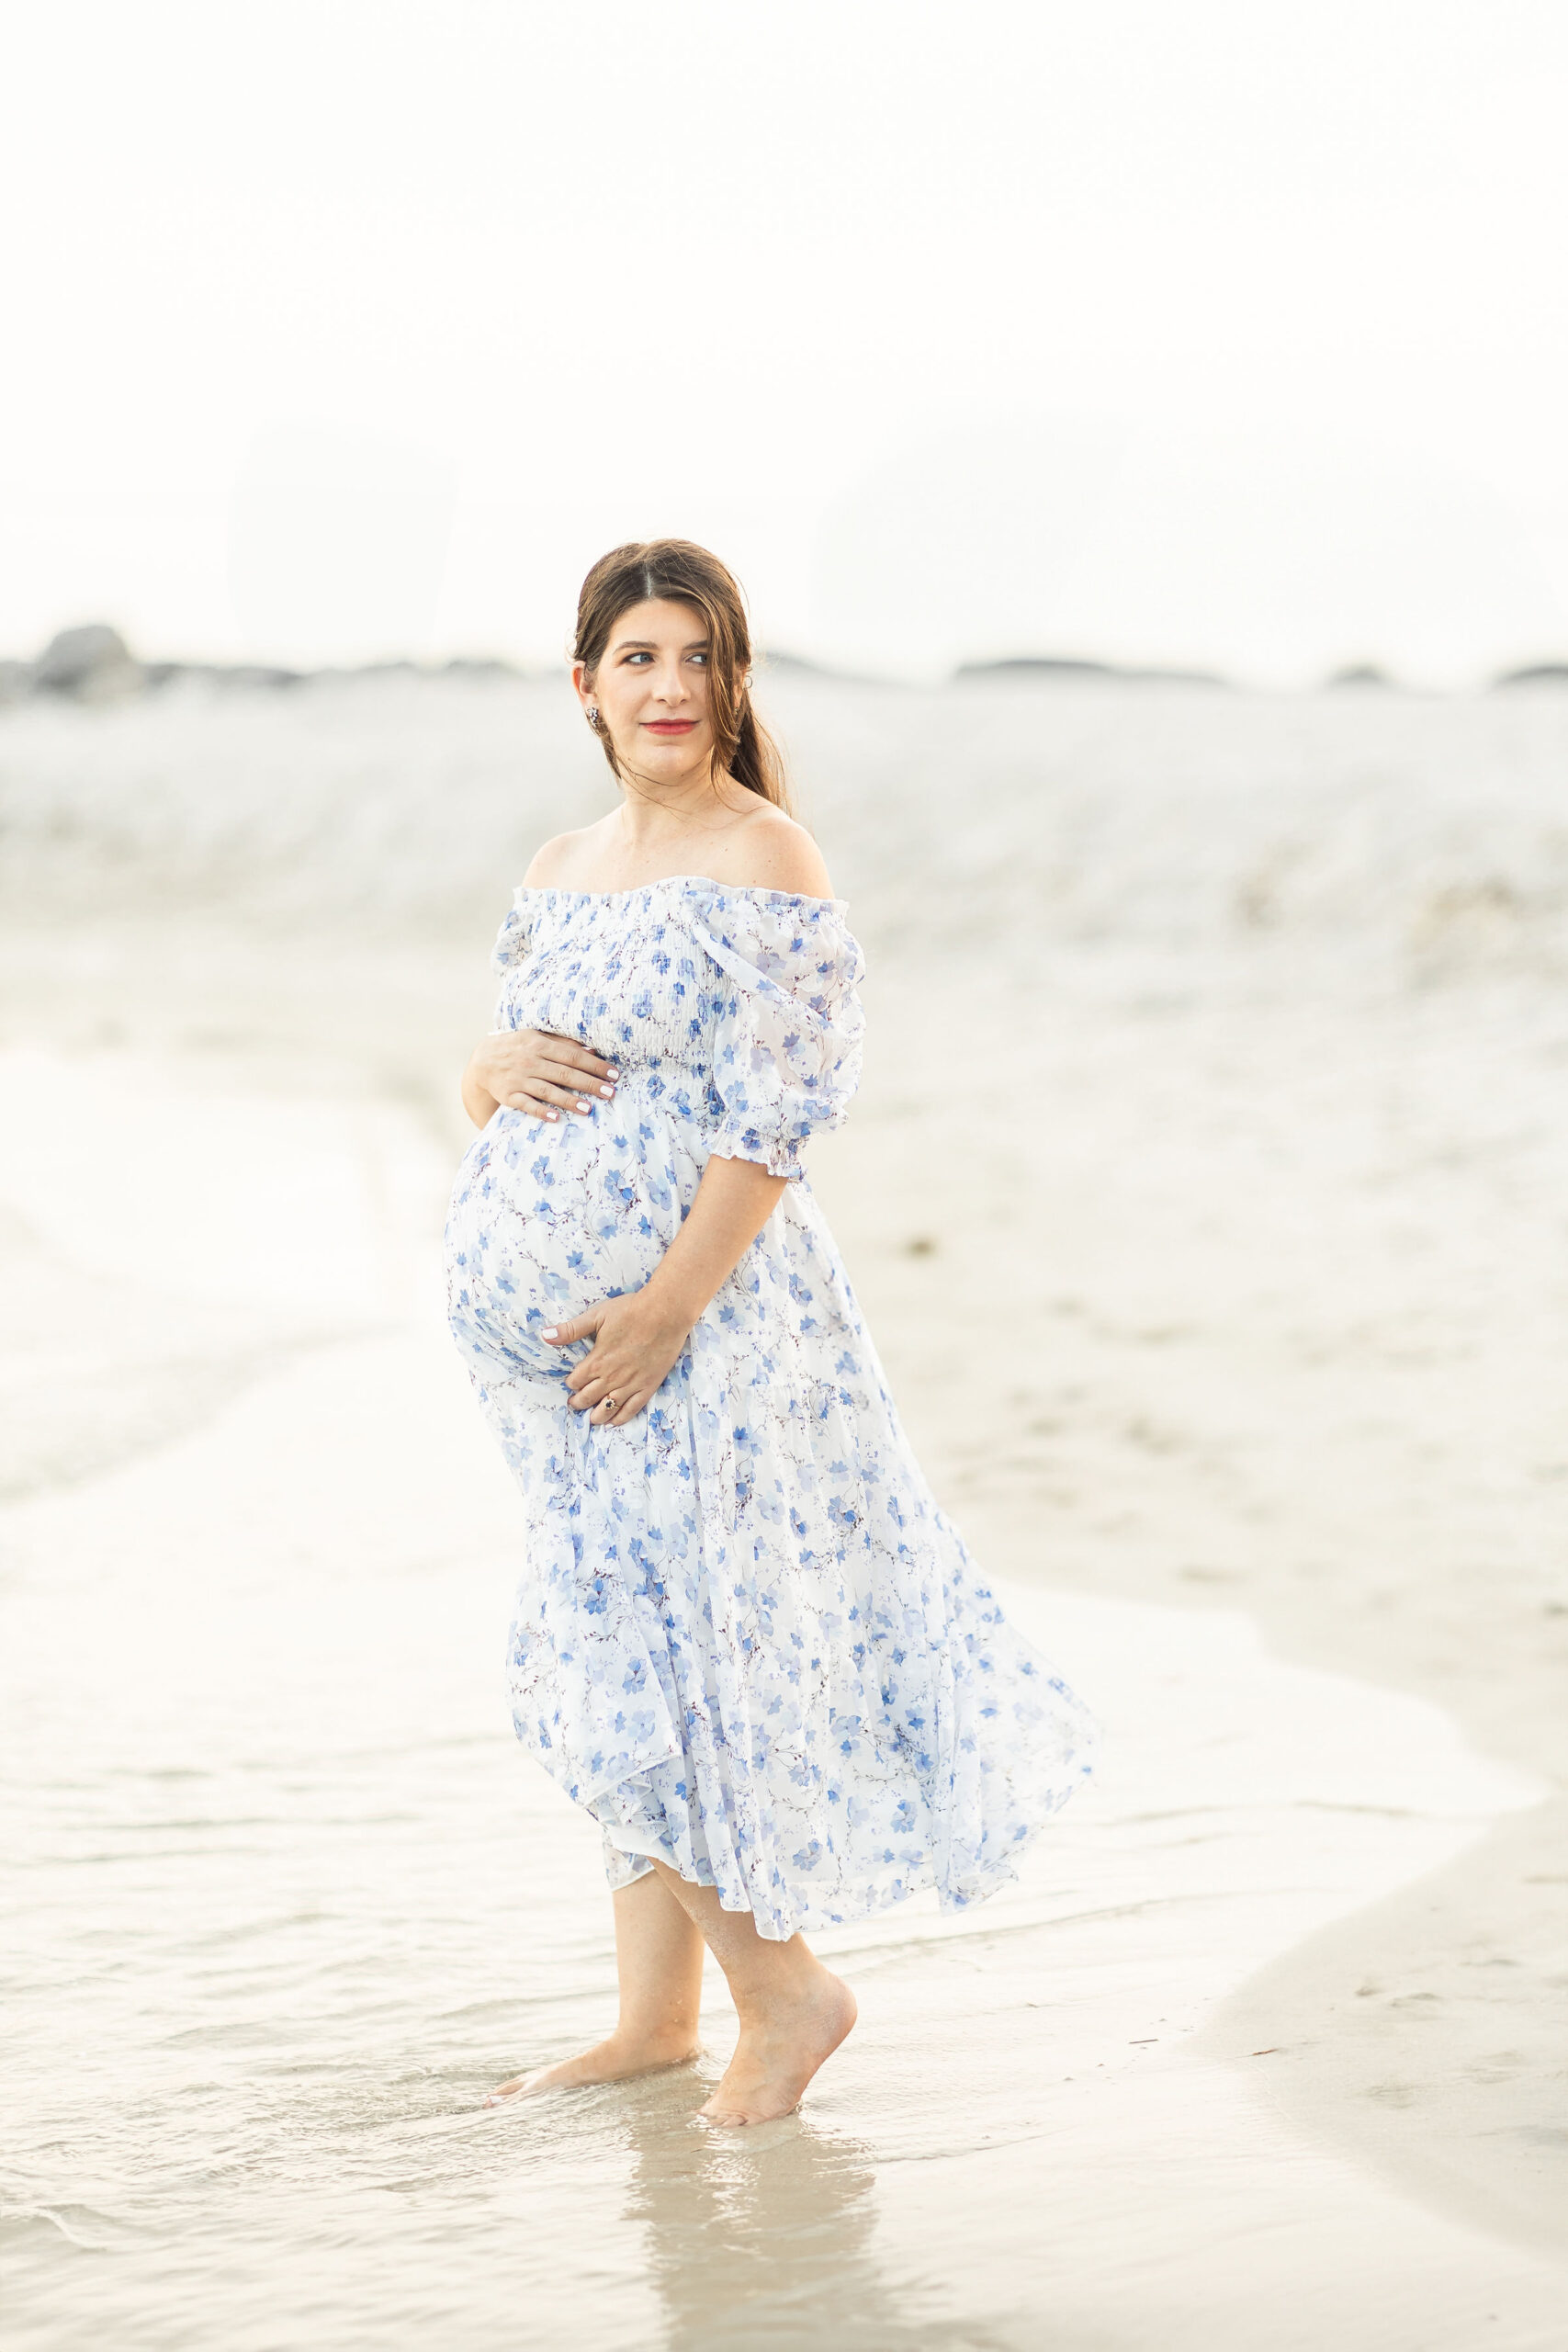 A mom to be looks over her shoulder while walking down a beach holding her bump in a blue floral dress